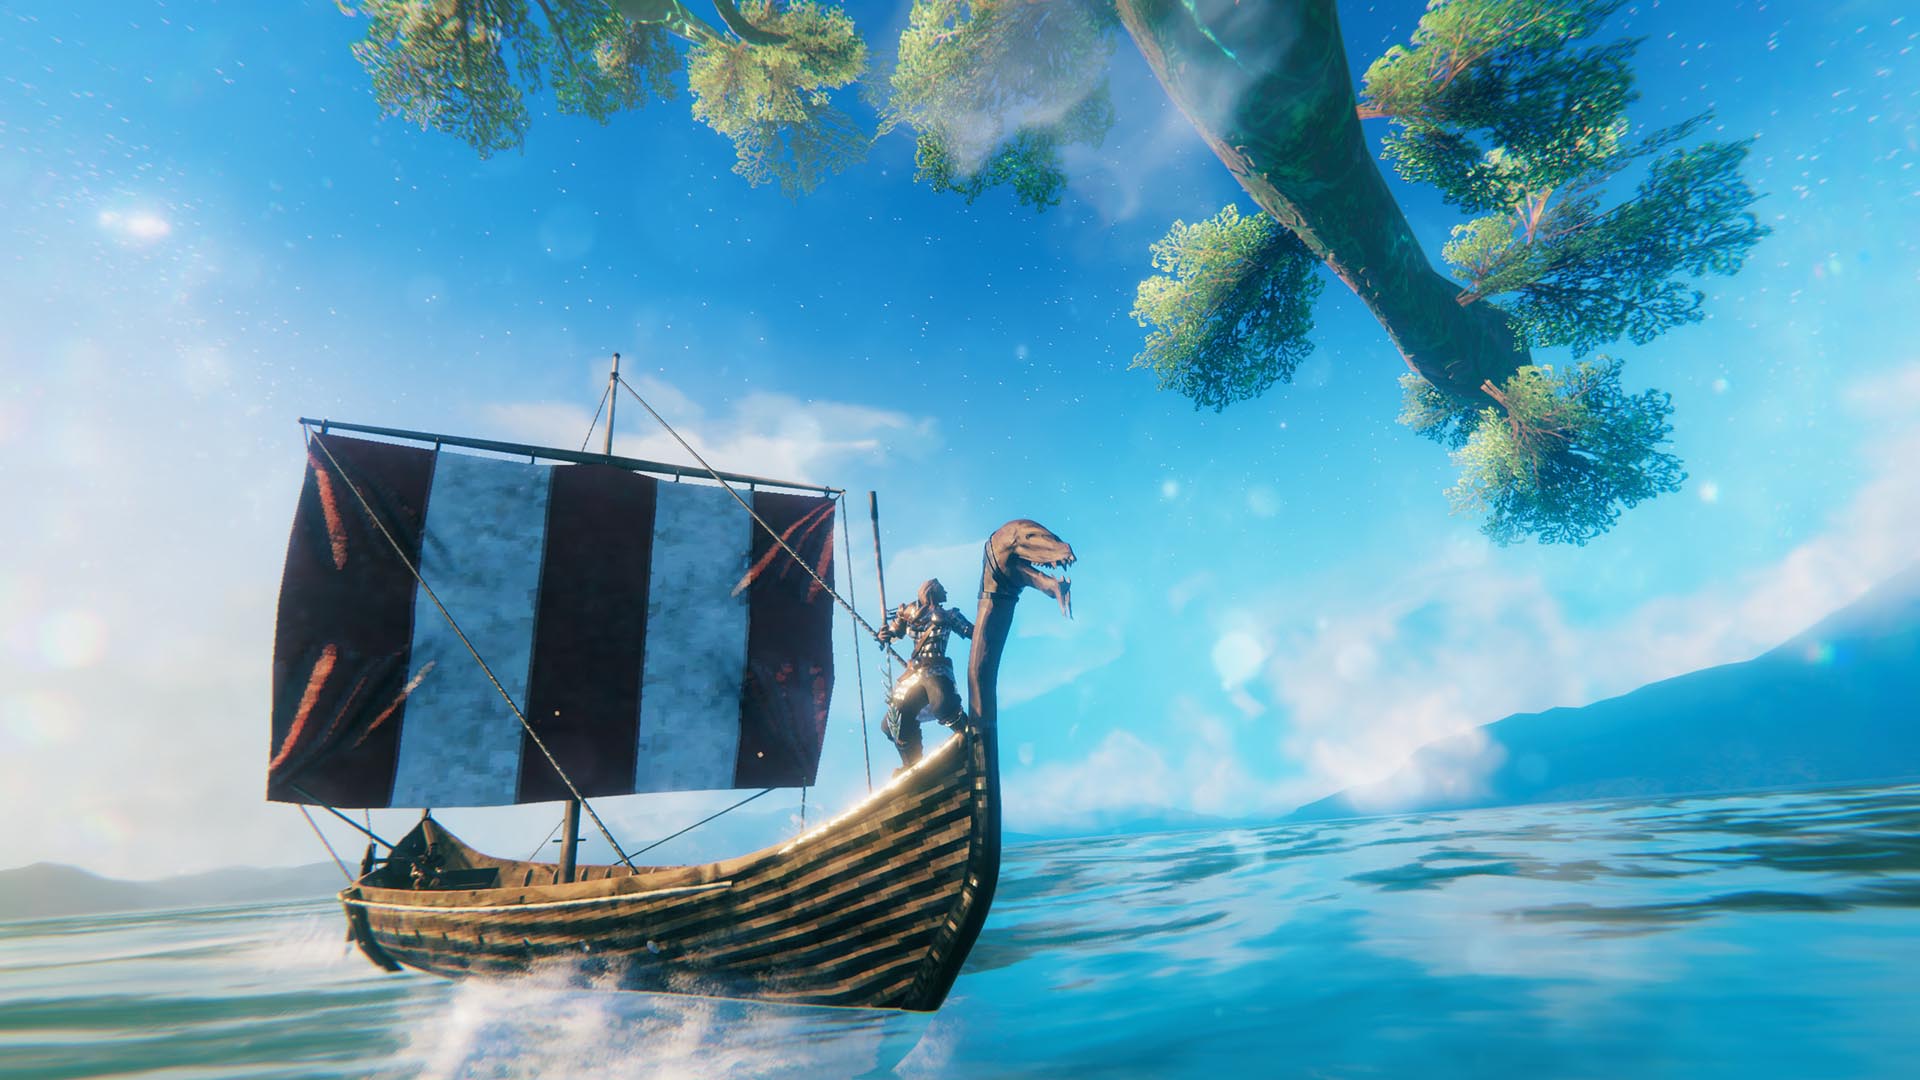 Boating in the game Valheim